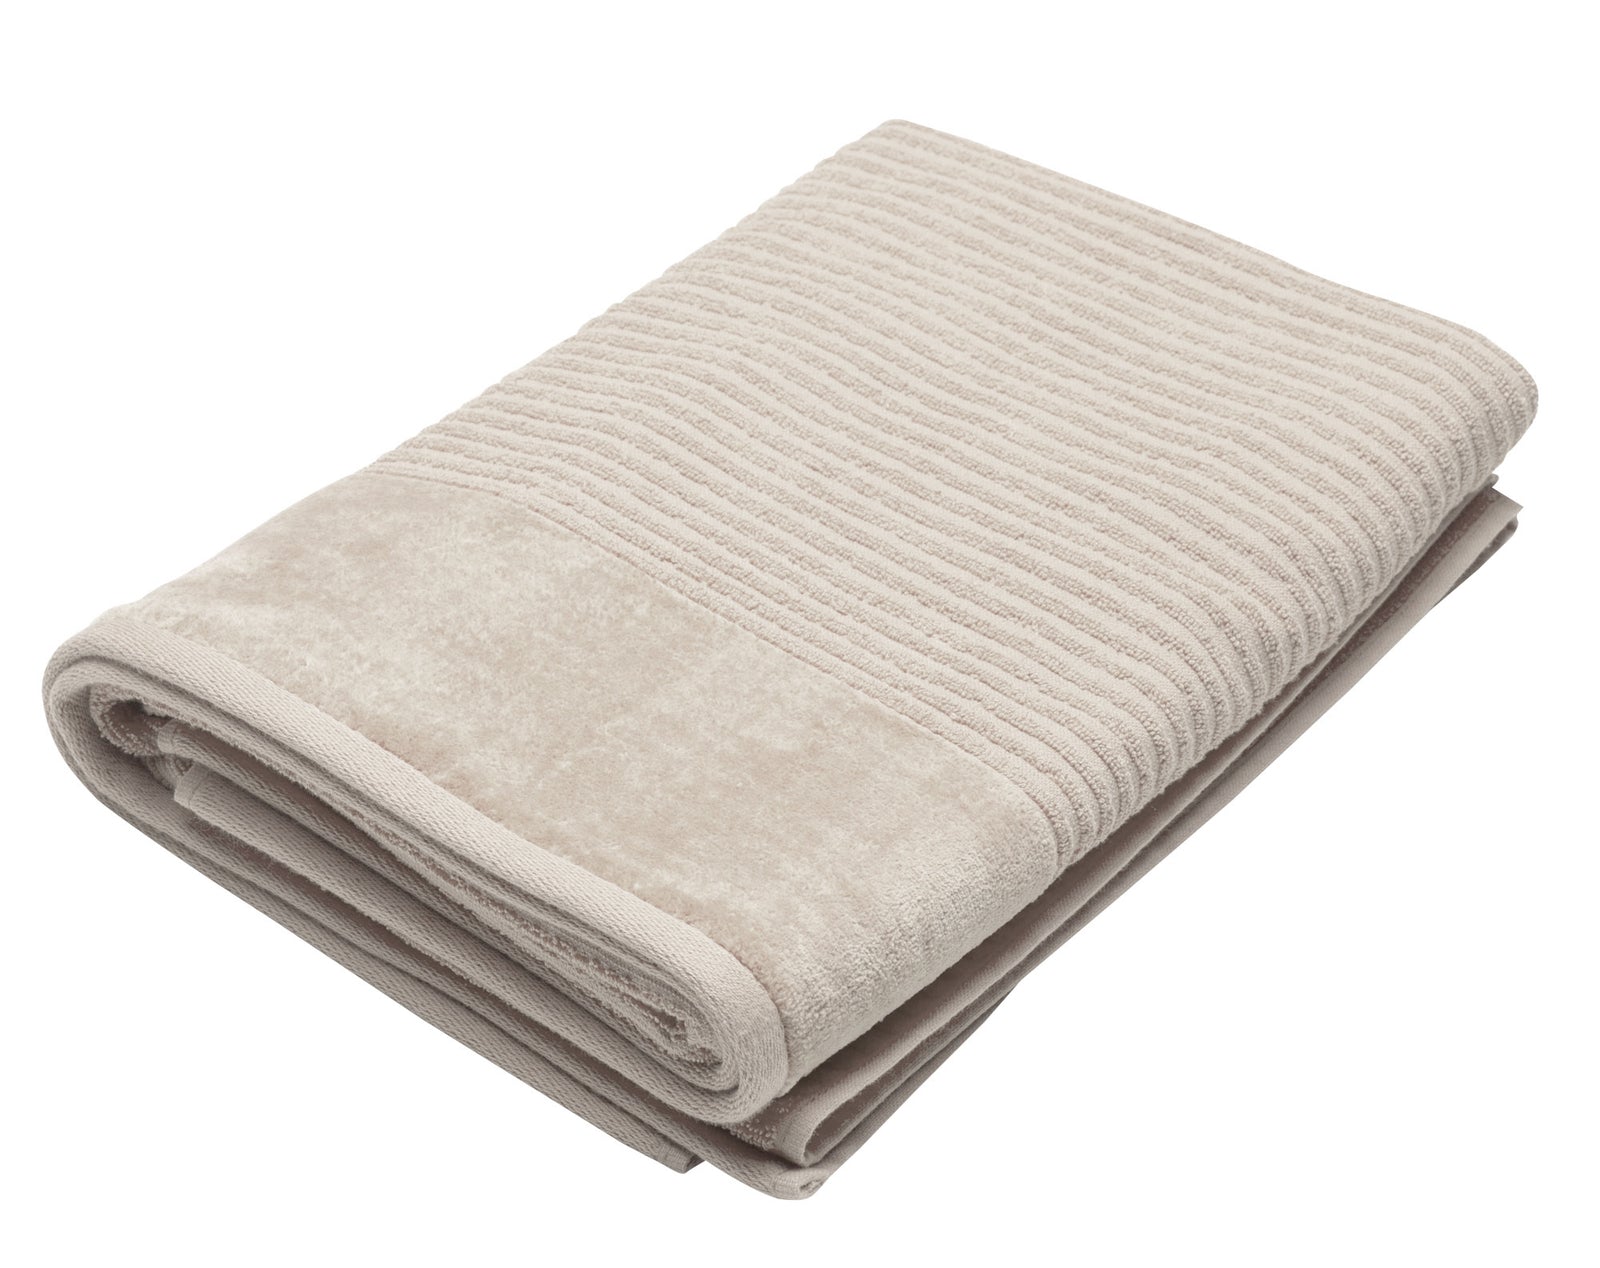 Jenny Mclean Royal Excellency Bath Towel 2 ply sheared Border 600GSM in Plaster